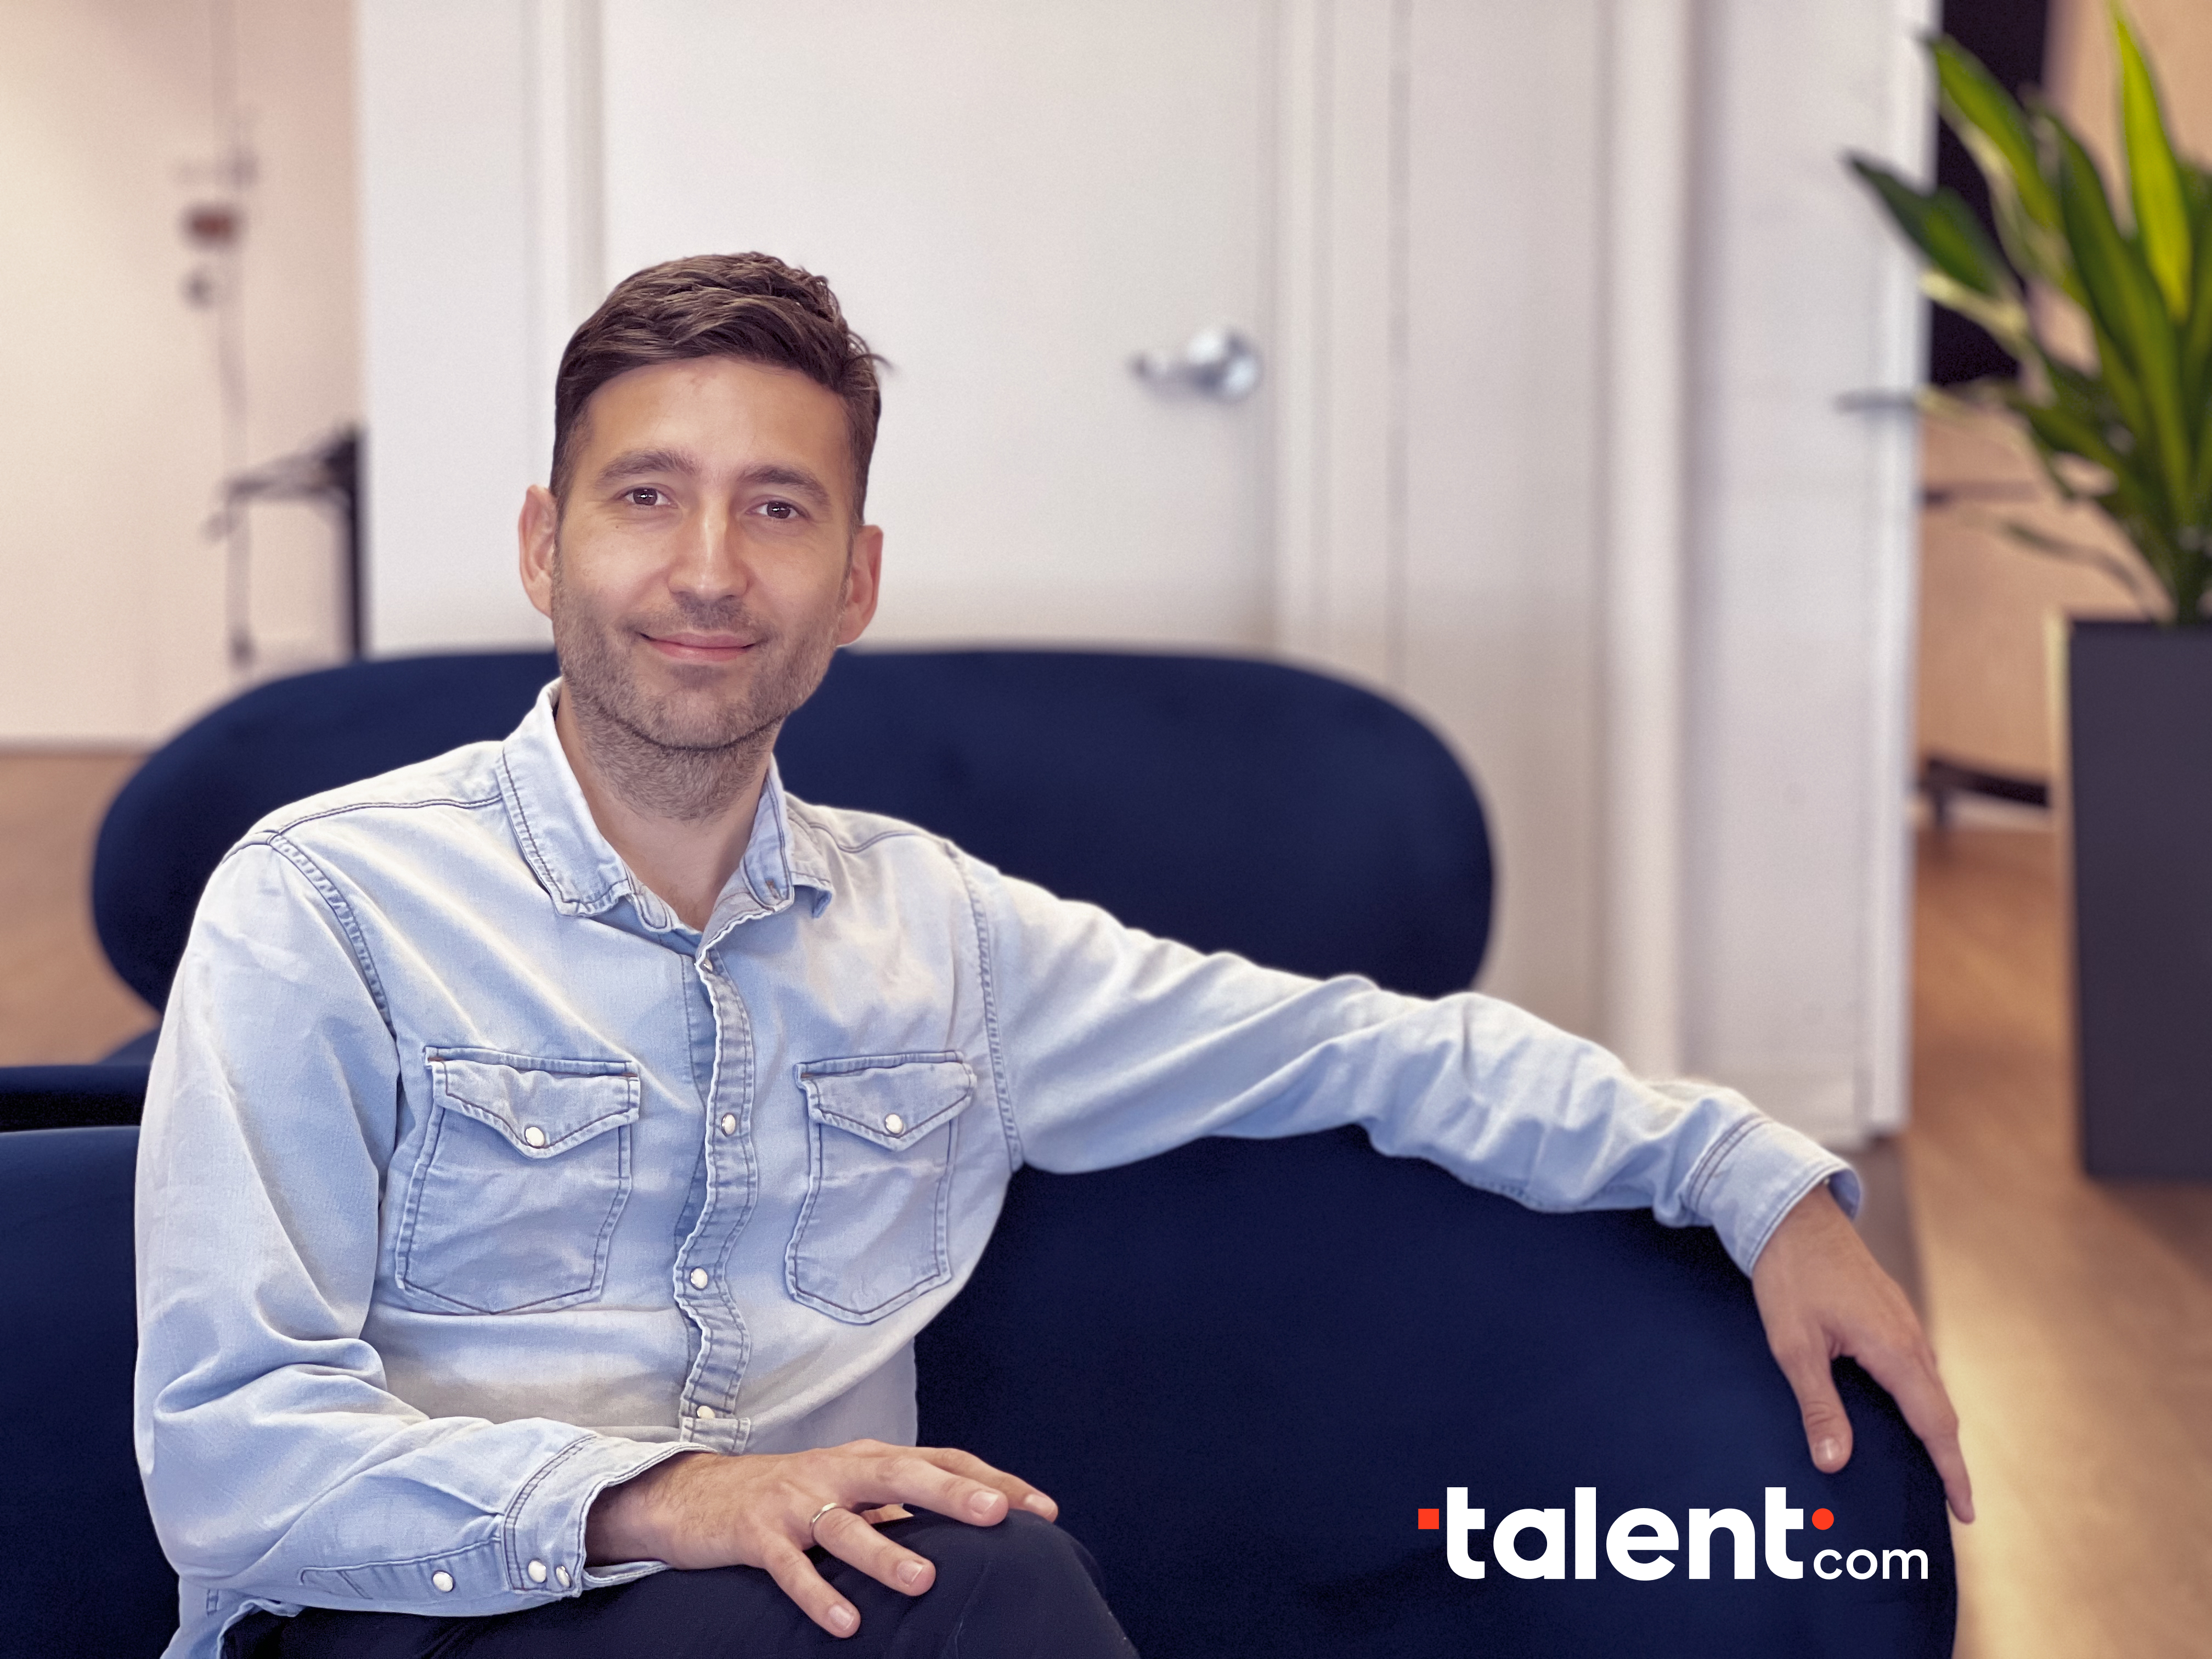 From 0 to 500 Employees: The Story of Talent.com w/ Co-CEO Lucas Martinez